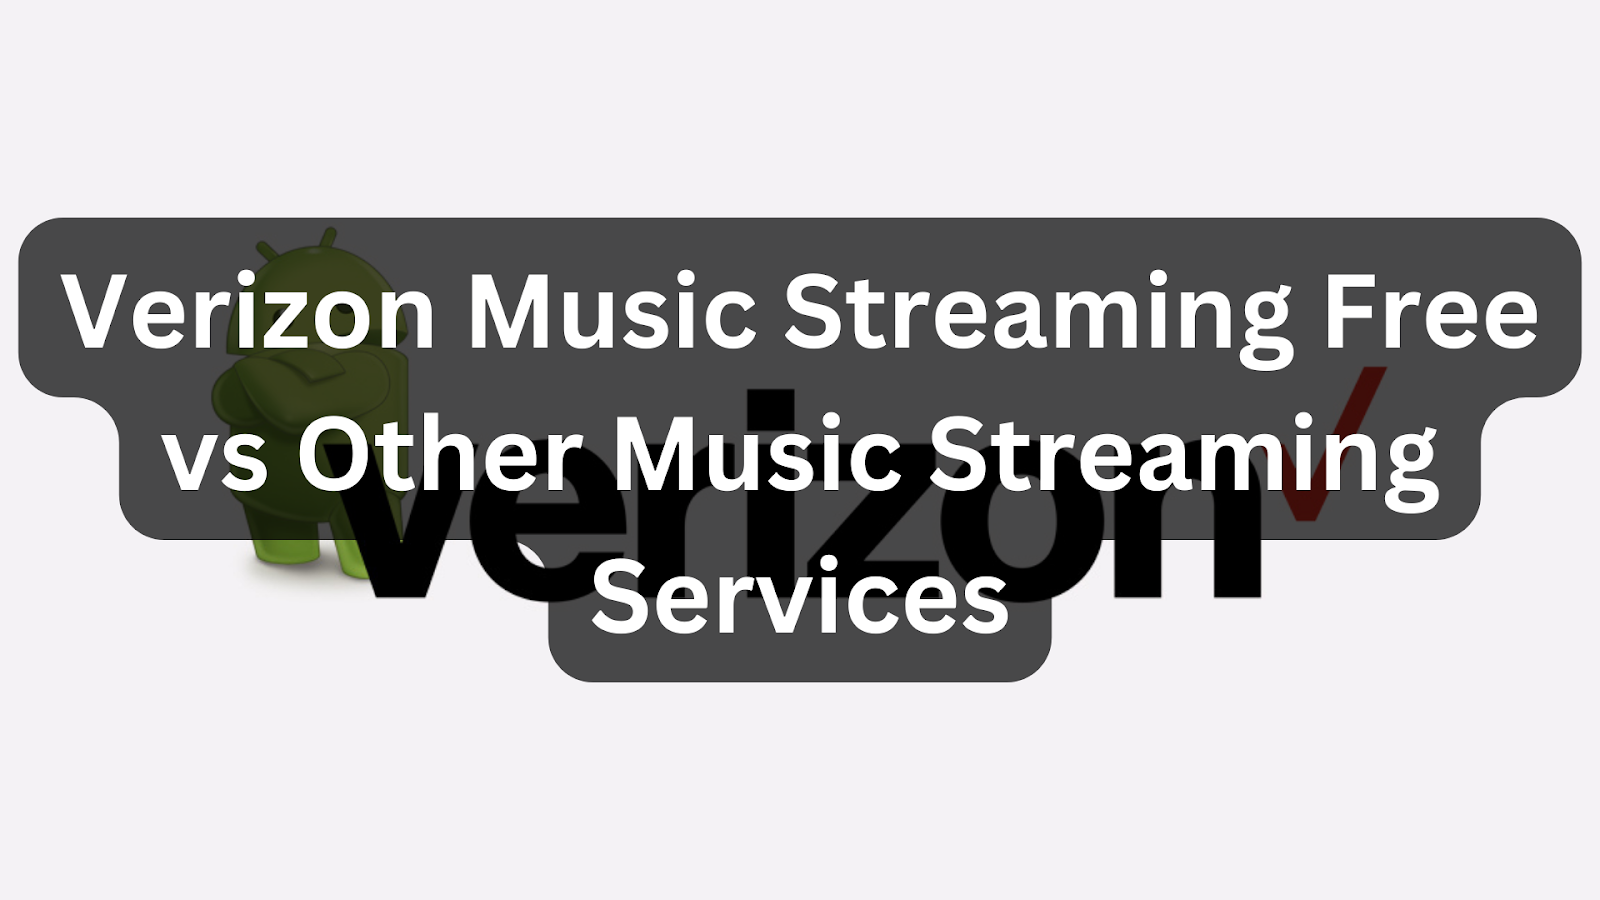 Verizon Music Streaming Free vs Other Music Streaming Services